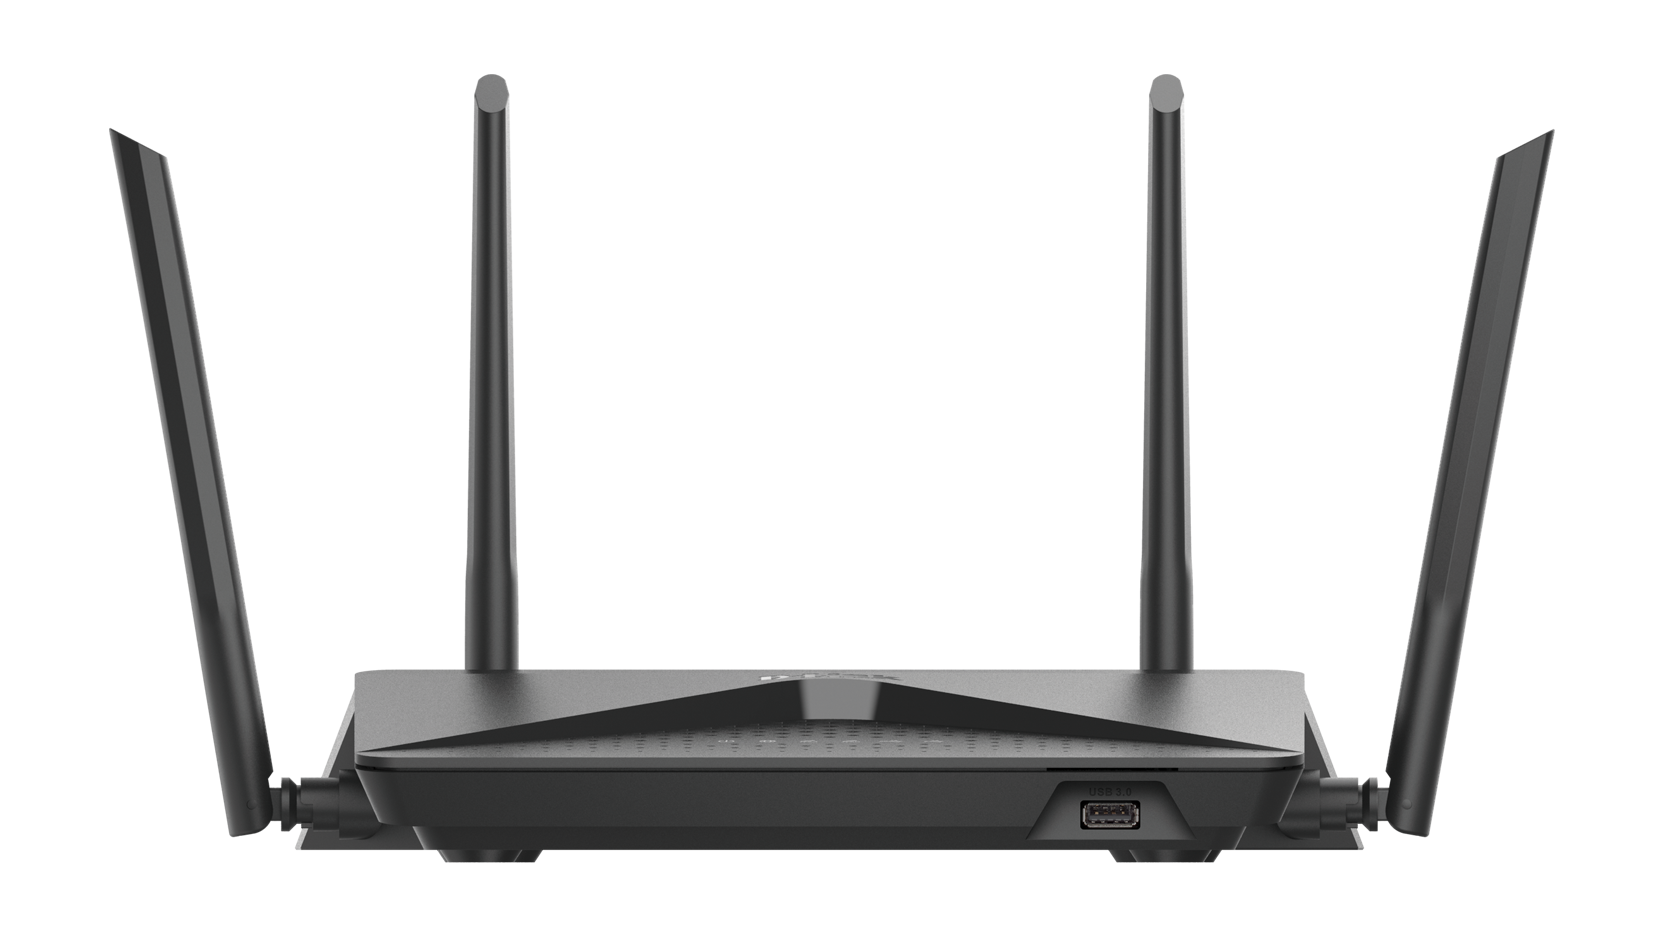 router.png